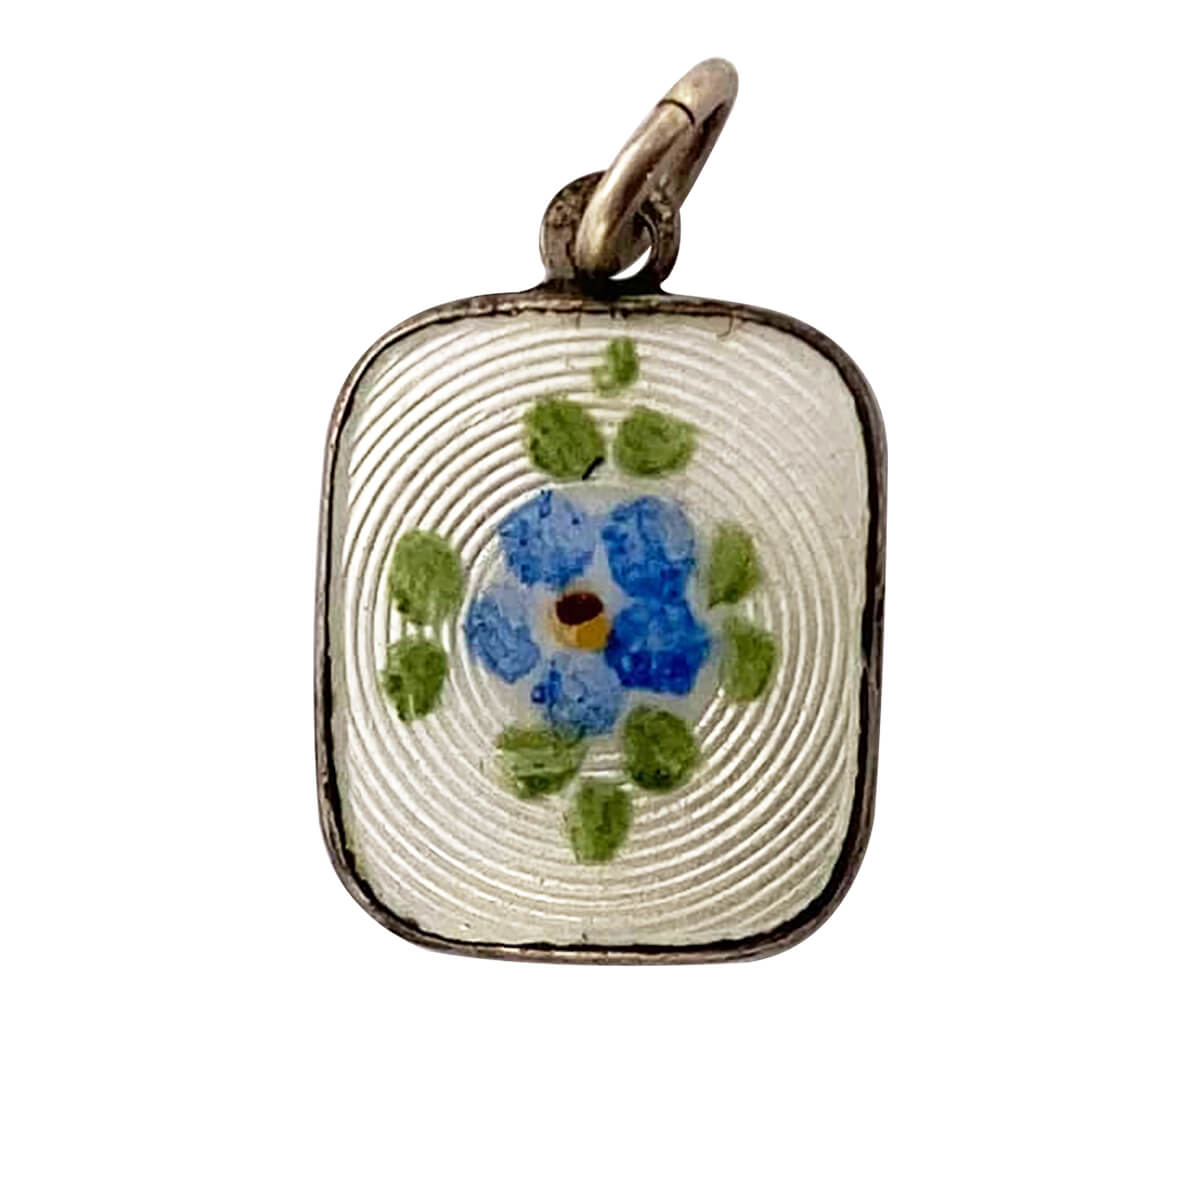 Vintage forget me not floral charm sterling silver pendant from Charmarama